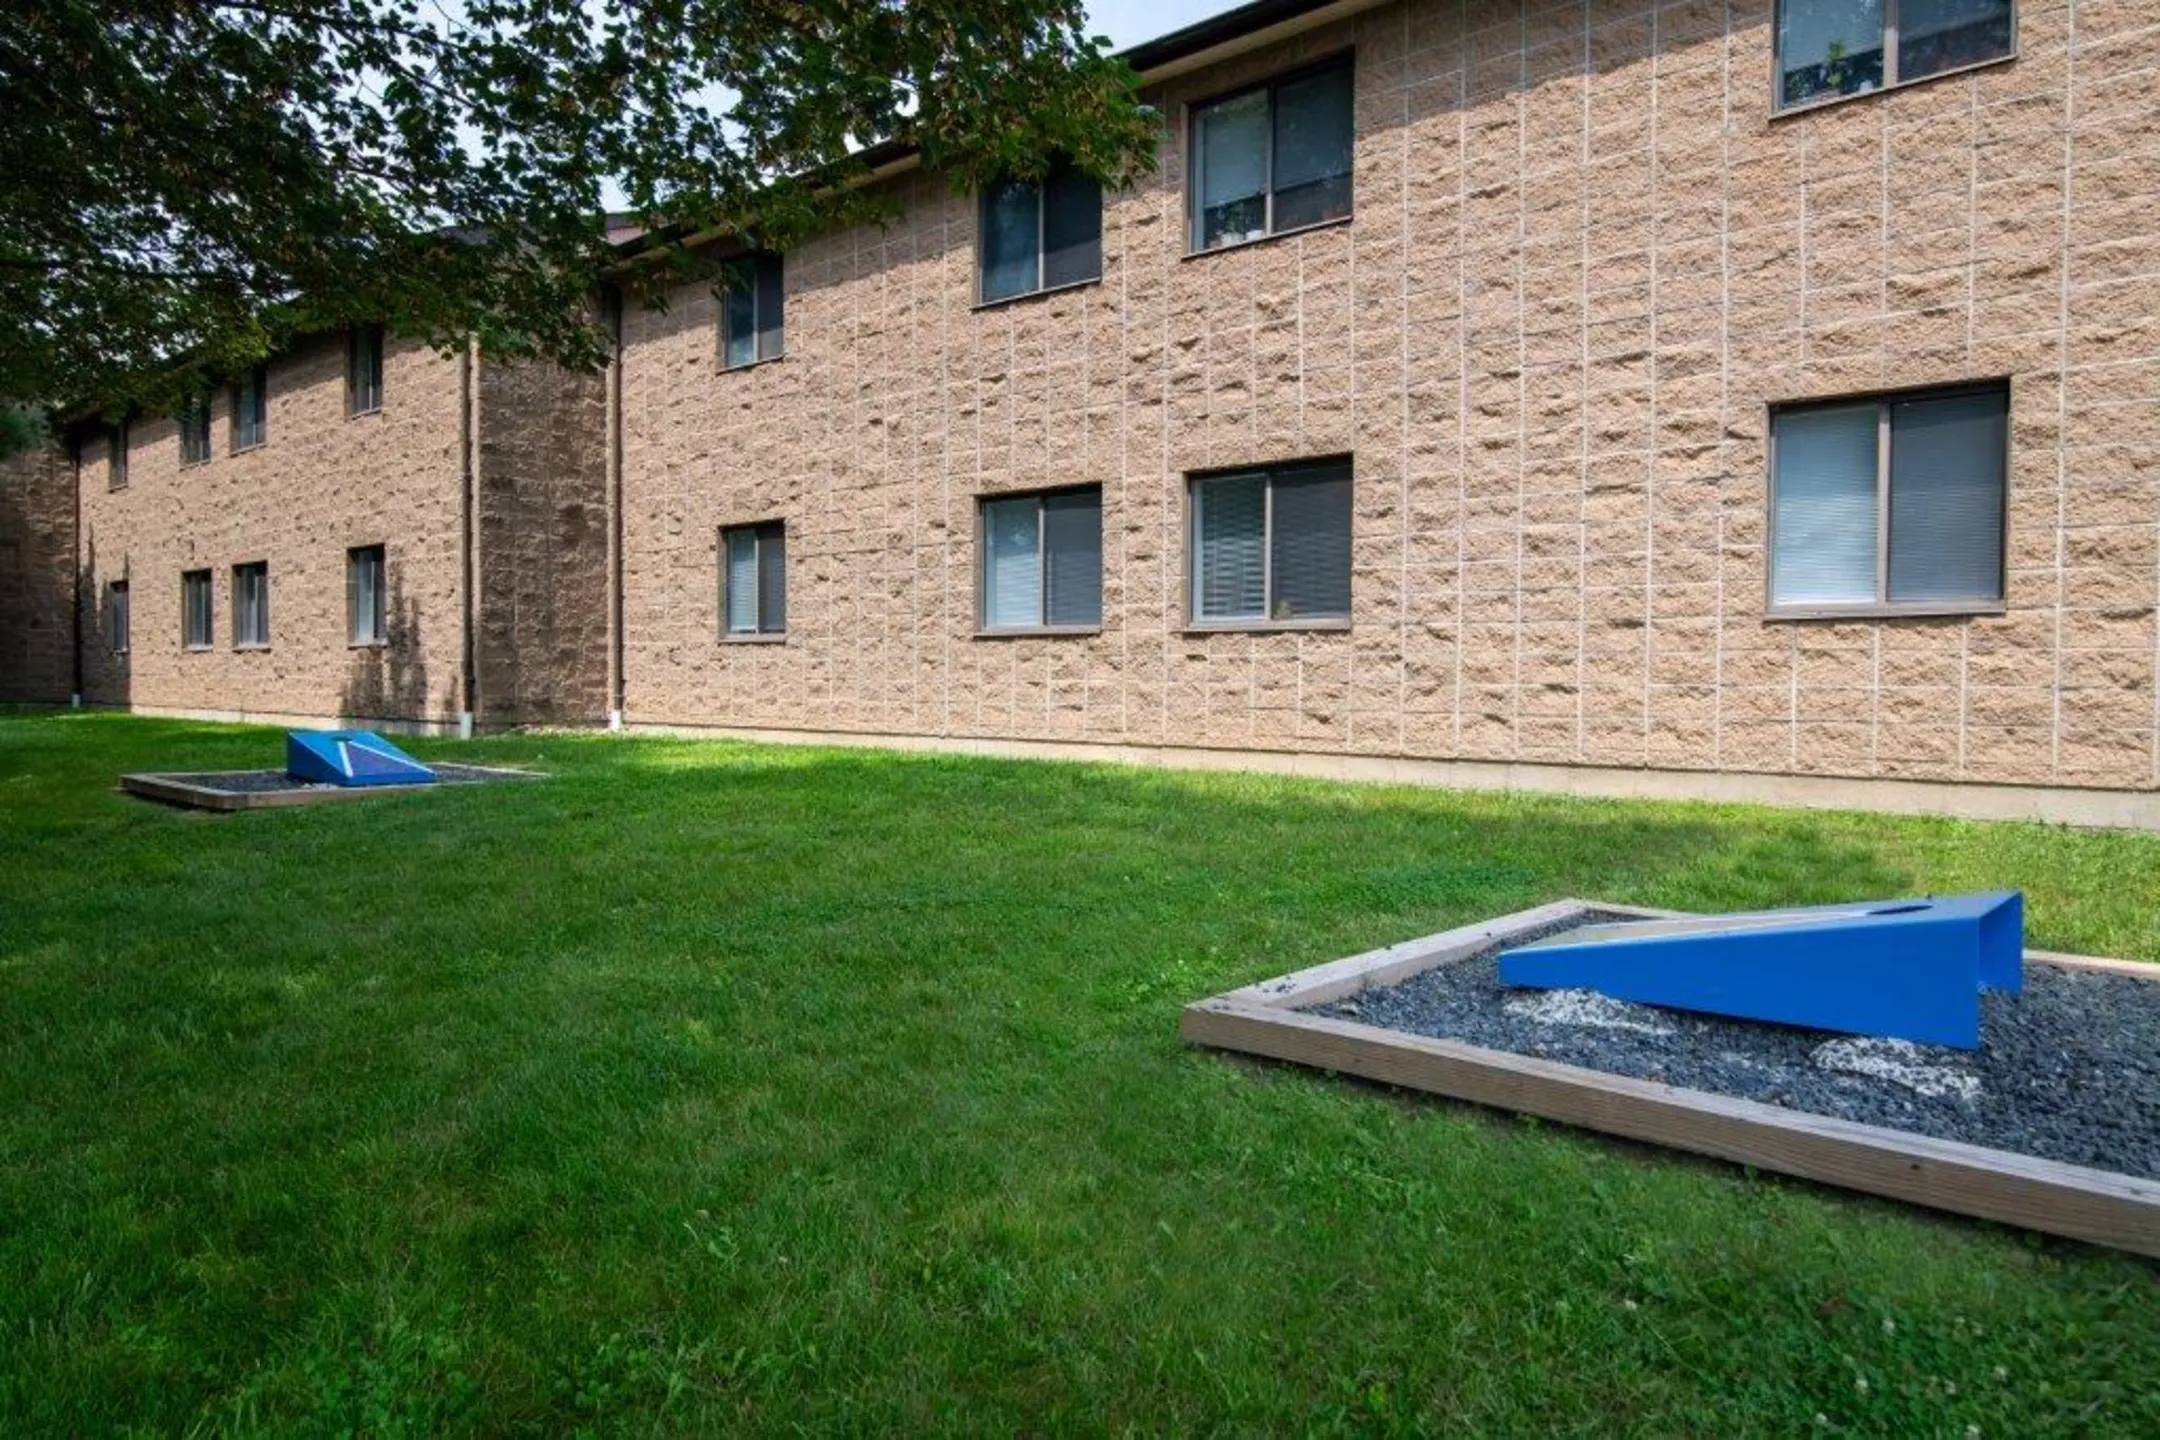 Building - Imperial Gardens Apartment Homes - Middletown, NY